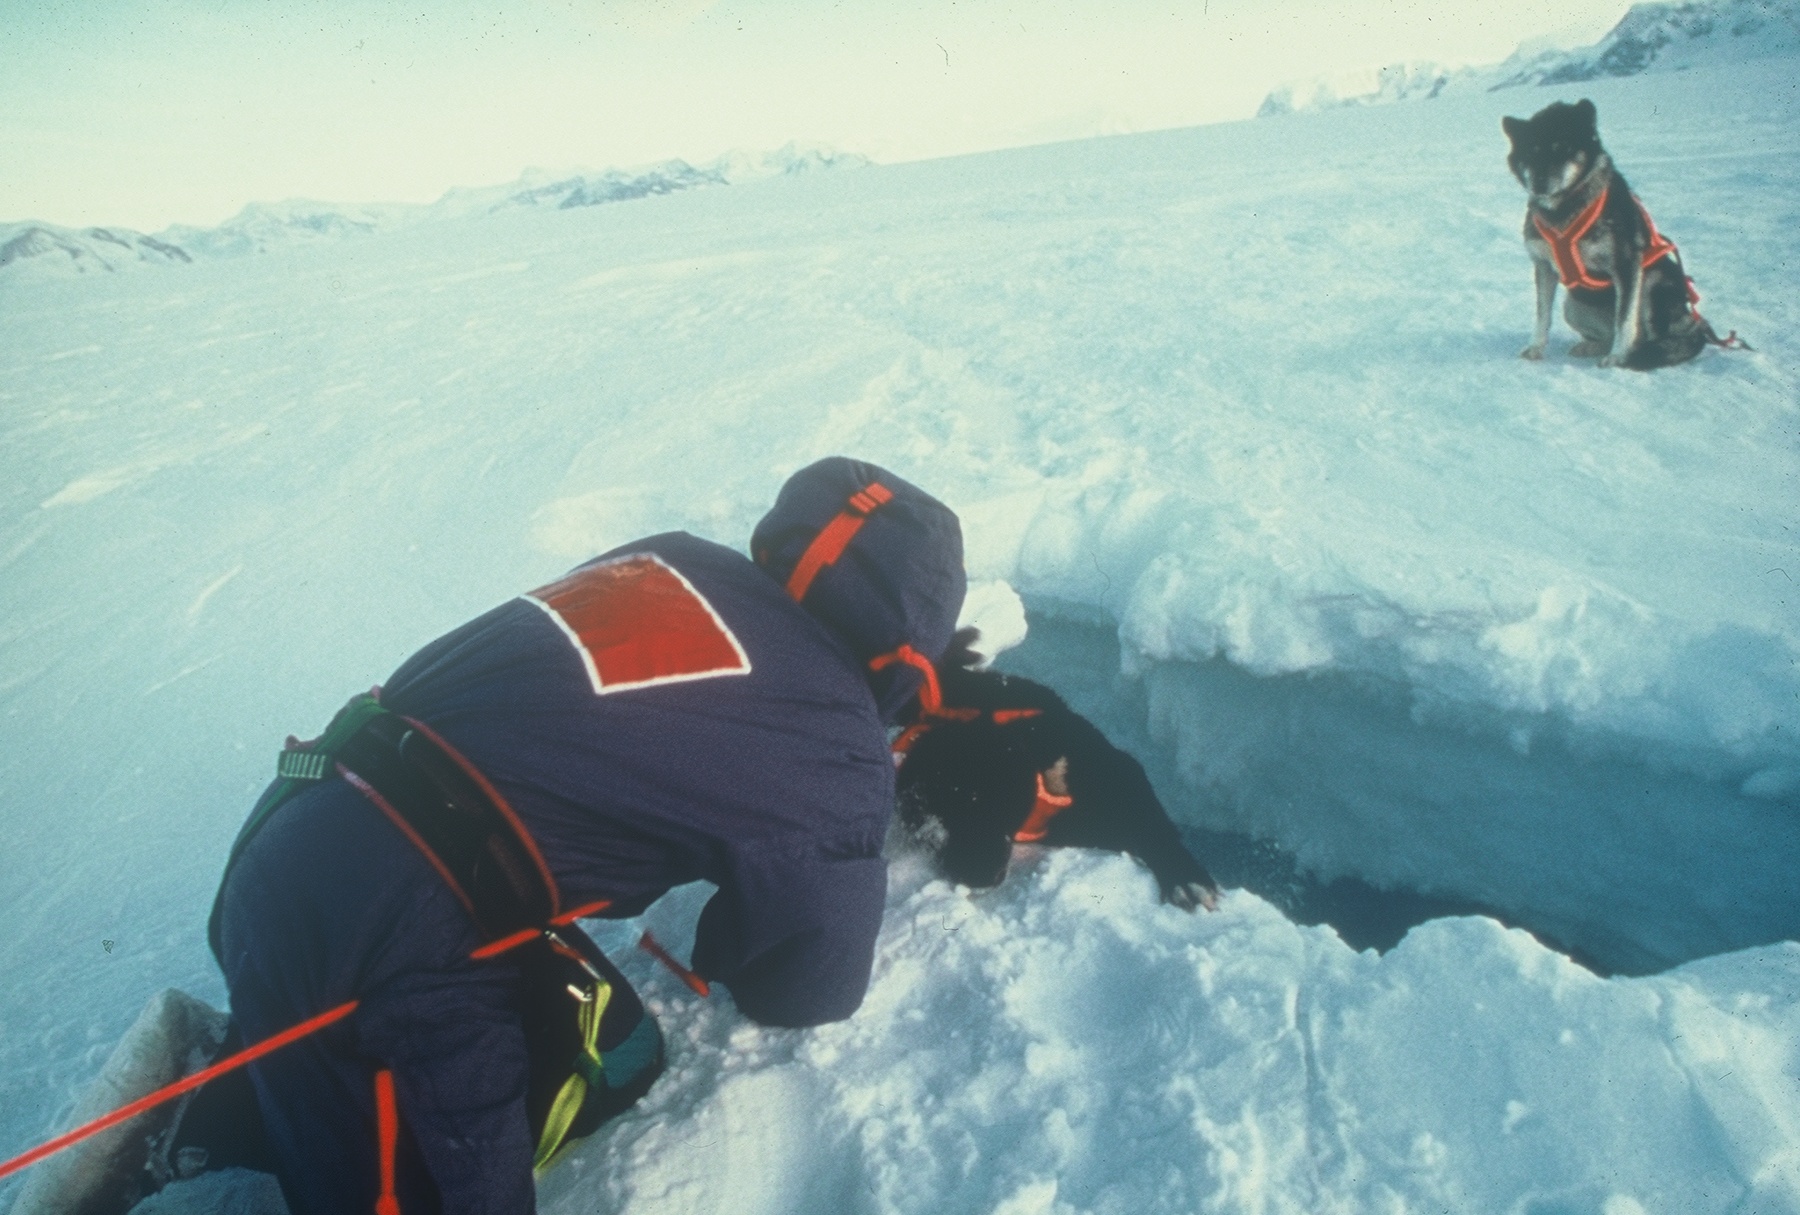 Rescuing the dog fell into a crevasse